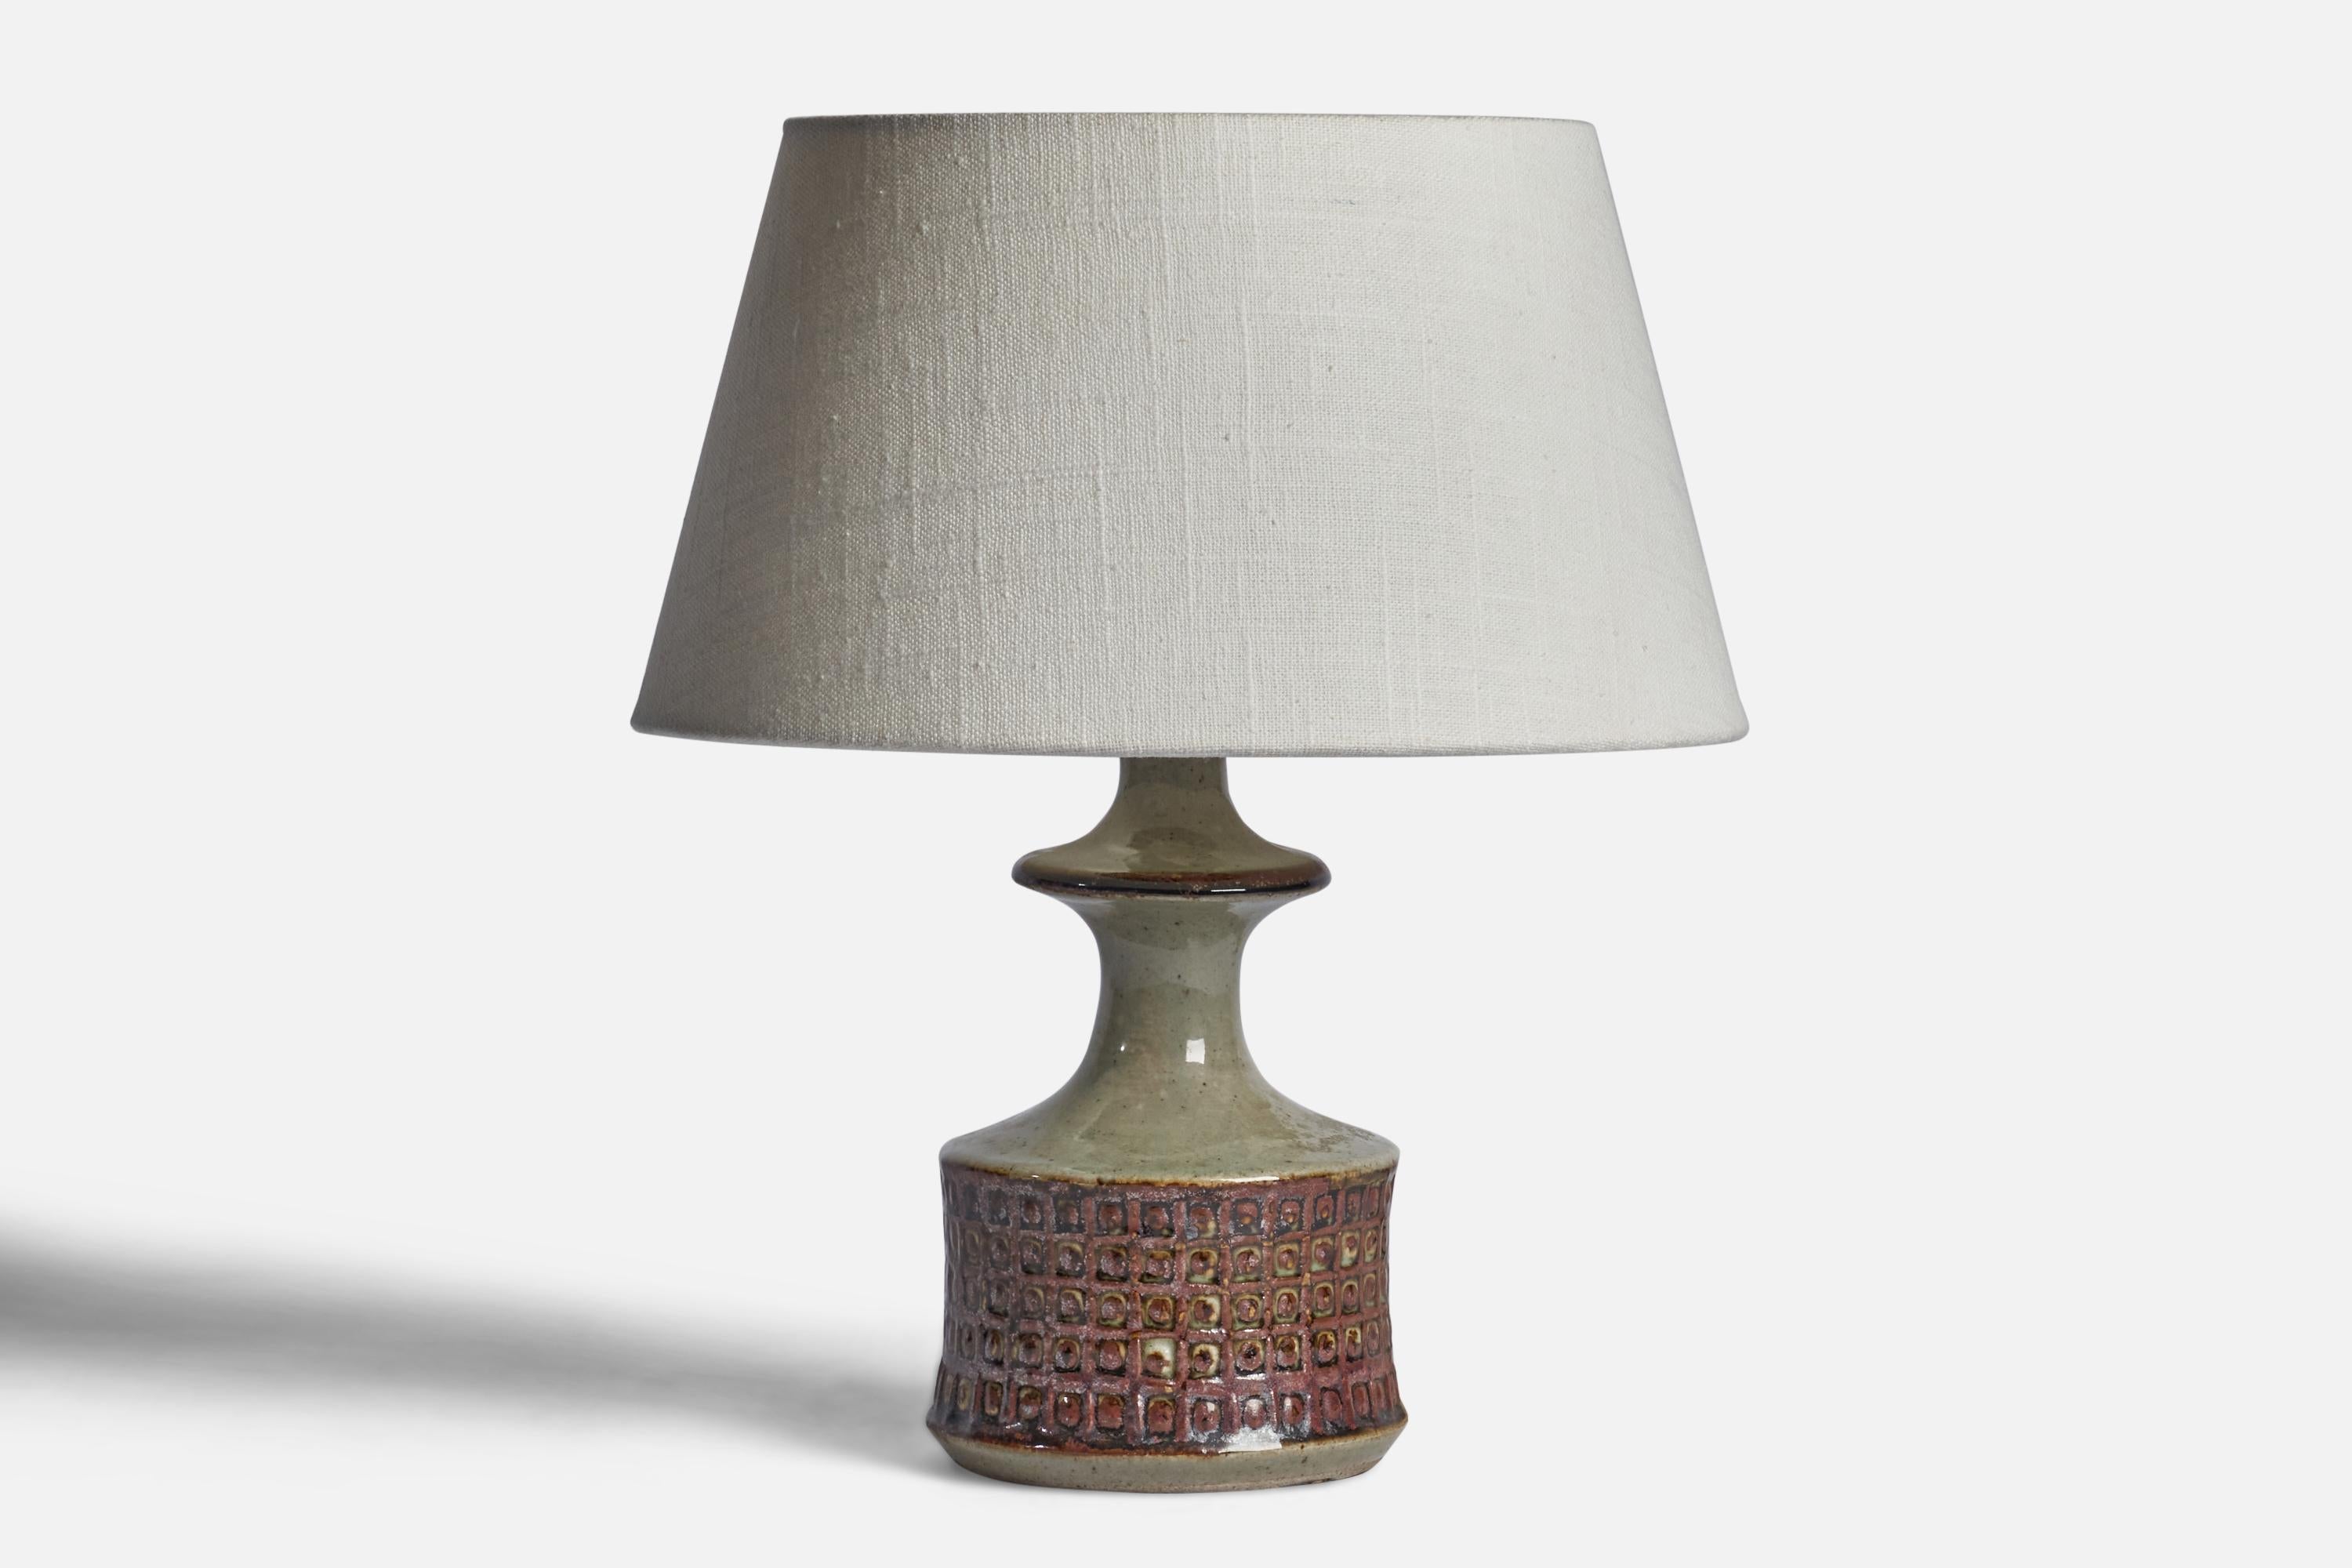 A brown and grey-glazed stoneware table lamp designed and produced by 
Søholm, Bornholm, Denmark, c. 1960s.

Dimensions of Lamp (inches): 9.45” H x 4.45” Diameter
Dimensions of Shade (inches): 7” Top Diameter x 10” Bottom Diameter x